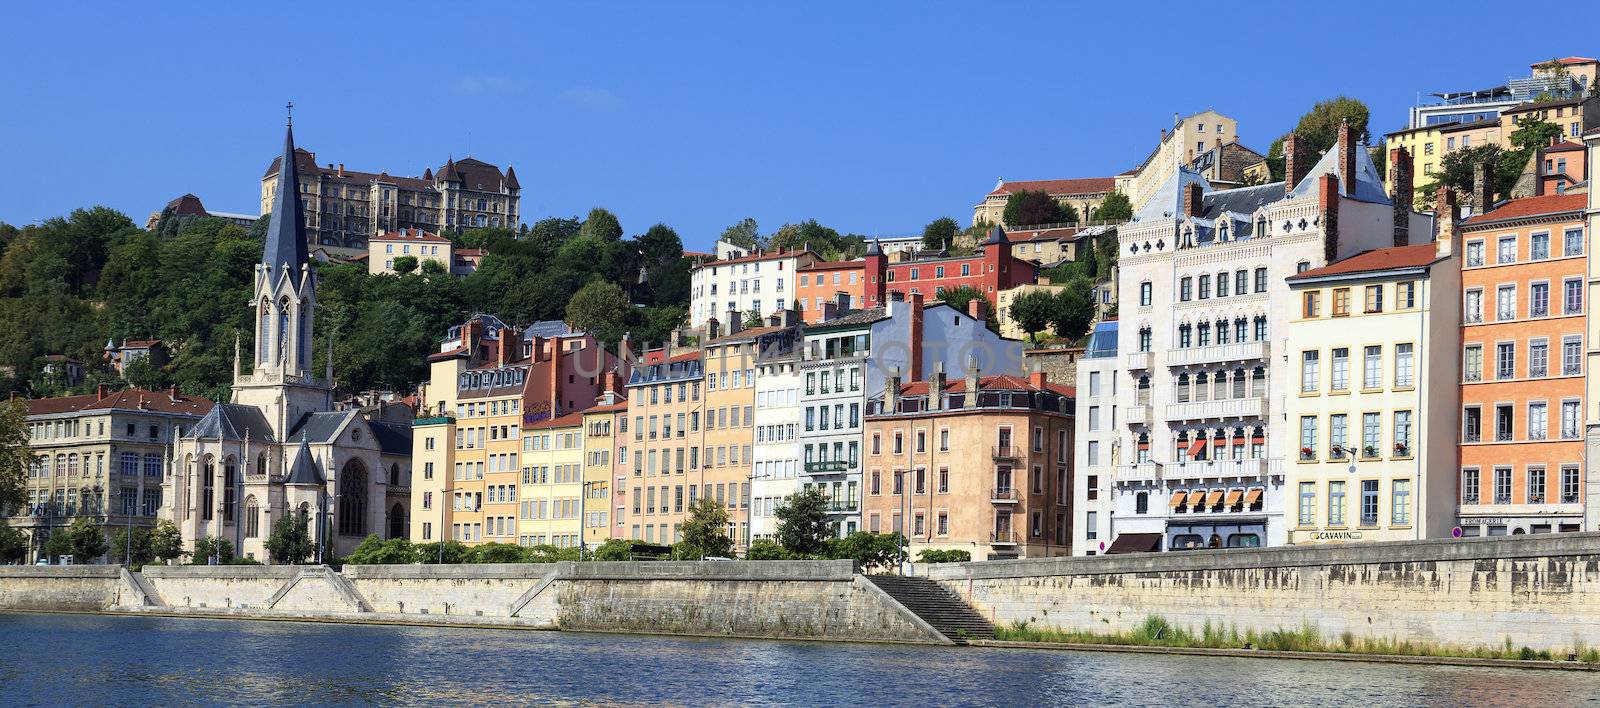 Saone river with colorful houses by vwalakte